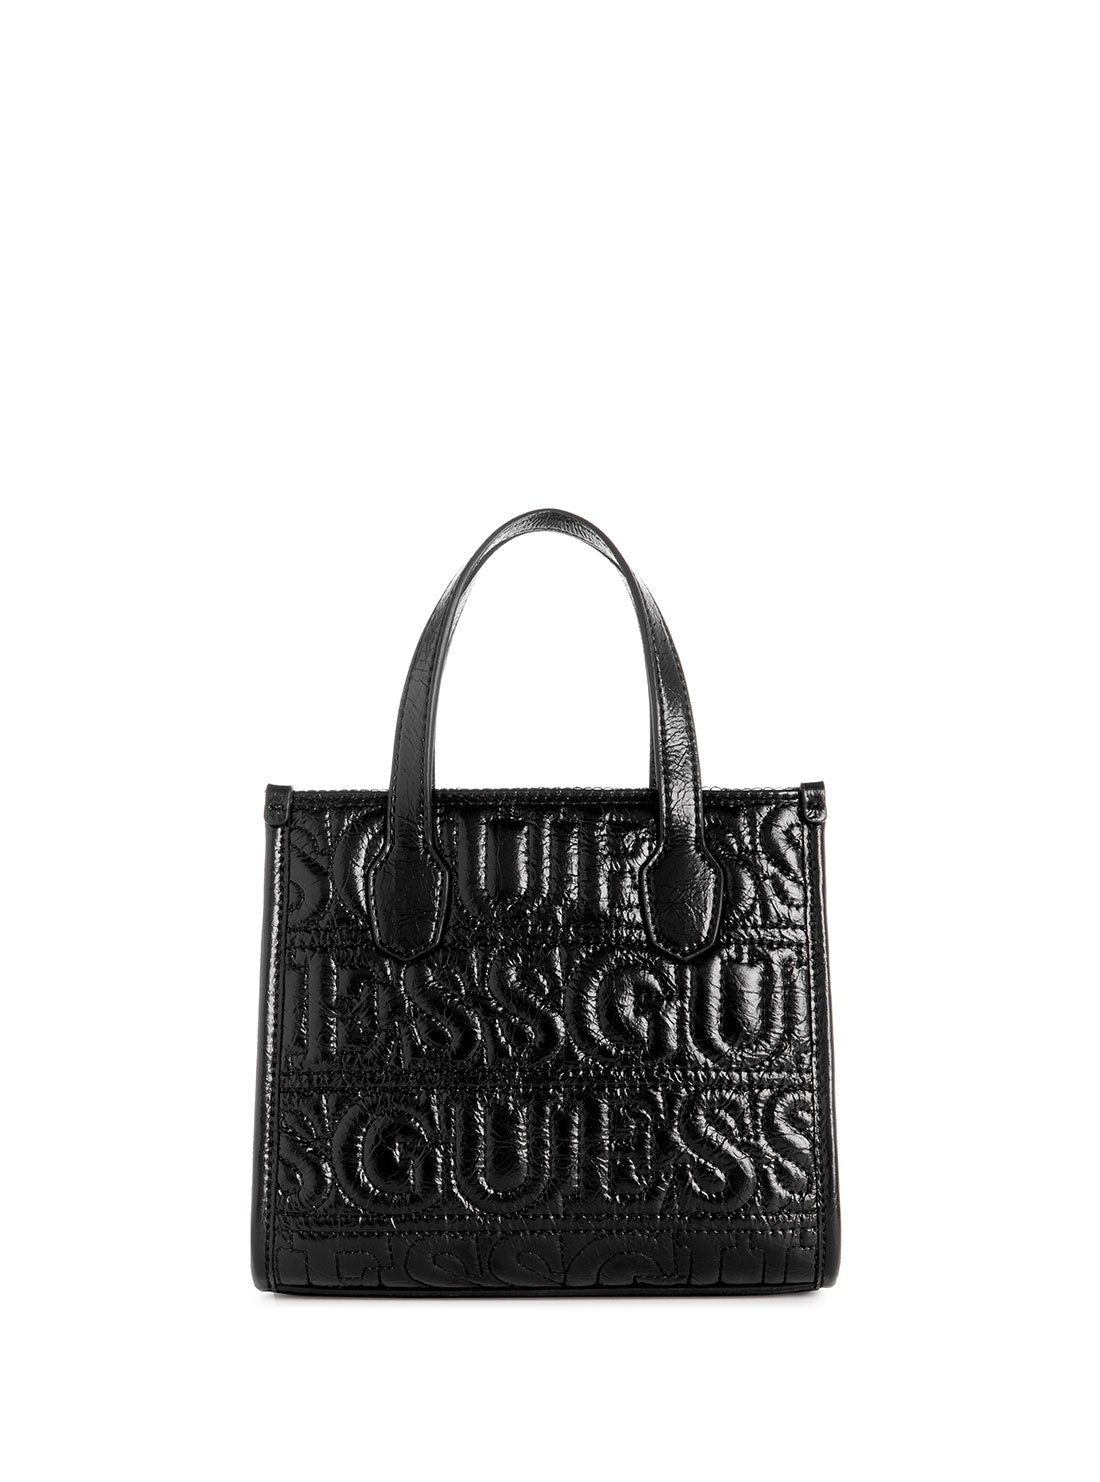 GUESS Women's Black Silvana Quilted Mini Tote Bag EG866577 Back View